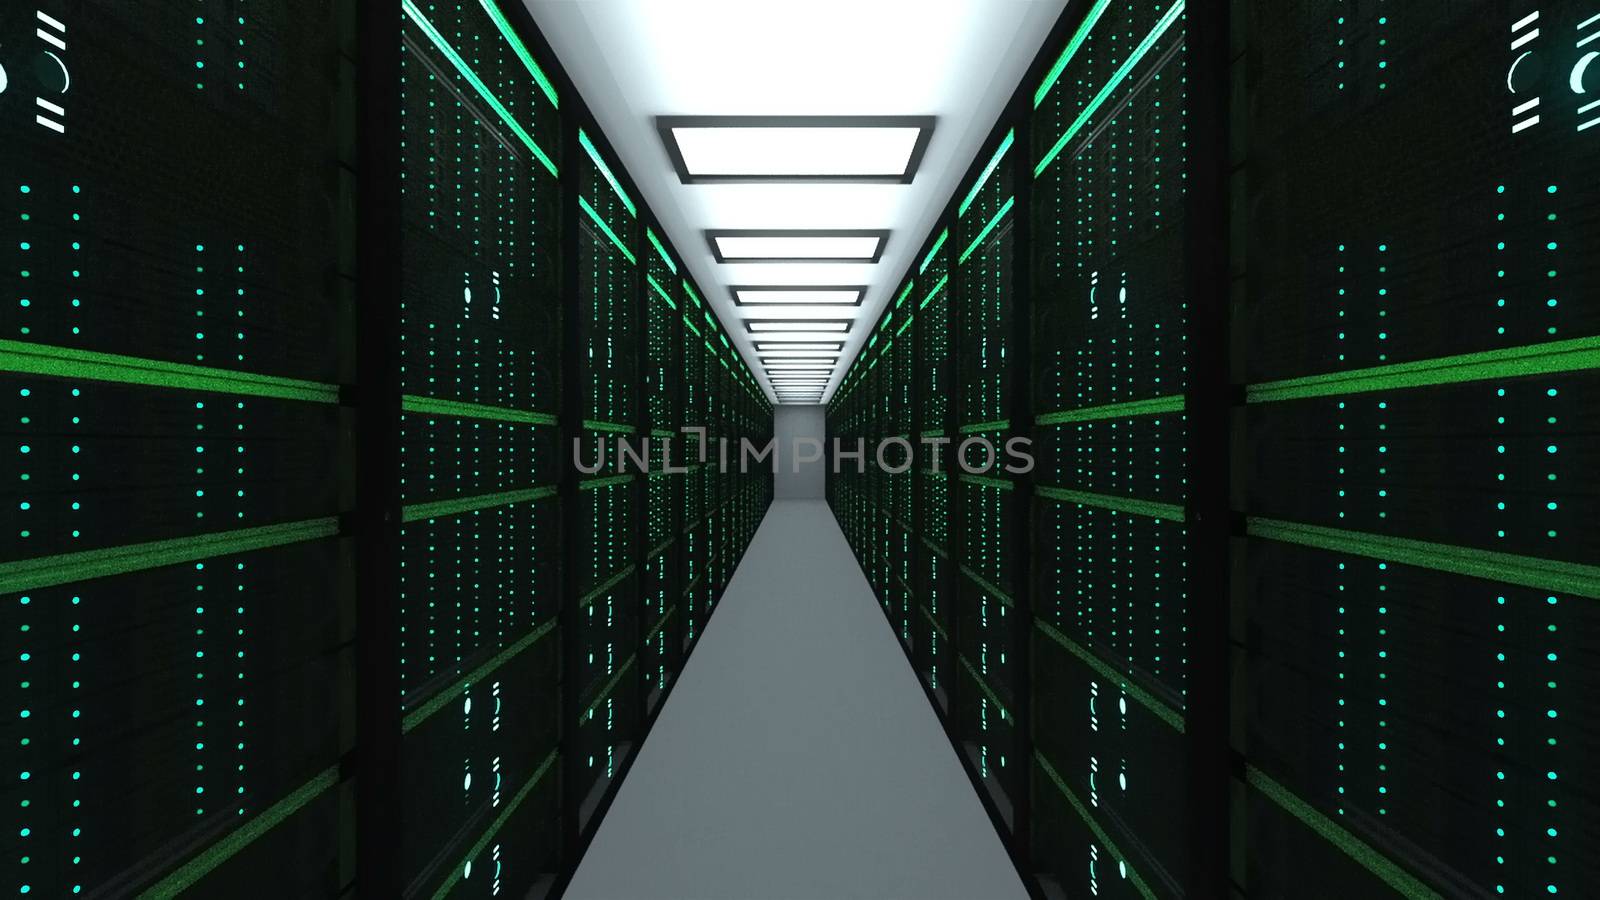 Modern server room interior in datacenter, web network and internet telecommunication technology, big data storage and cloud service concept, 3d render by nolimit046